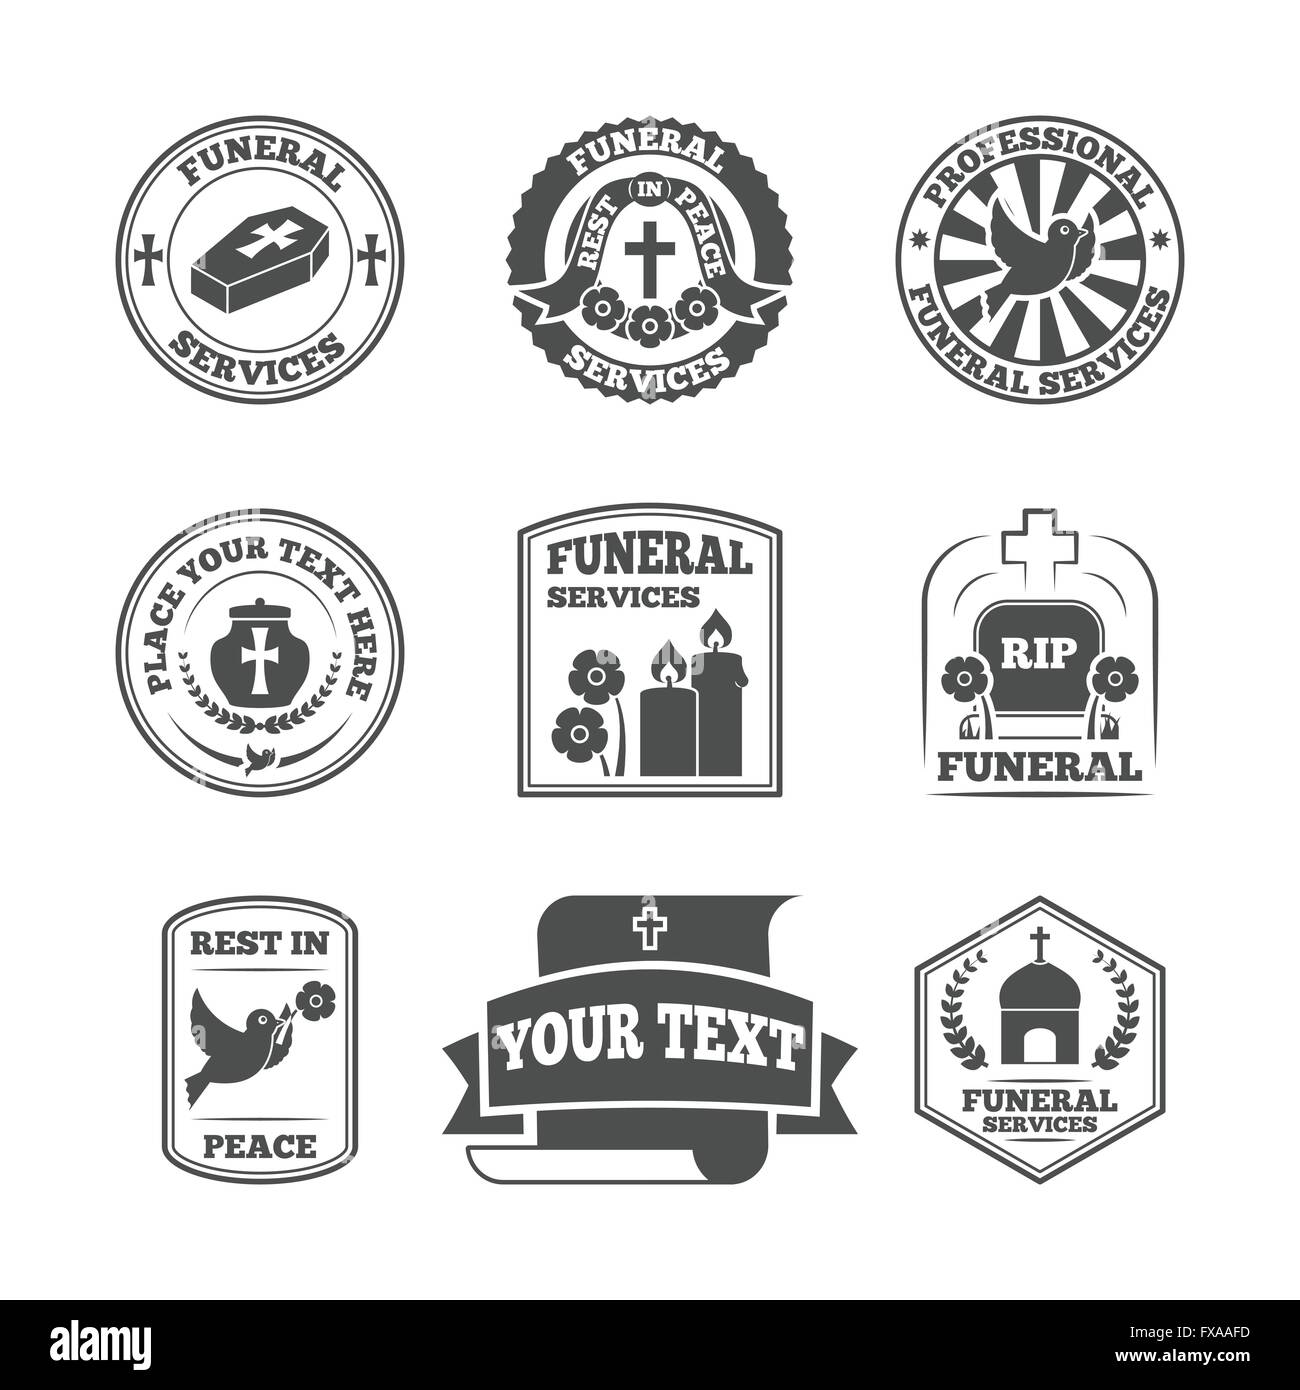 Funeral labels icons set Stock Vector